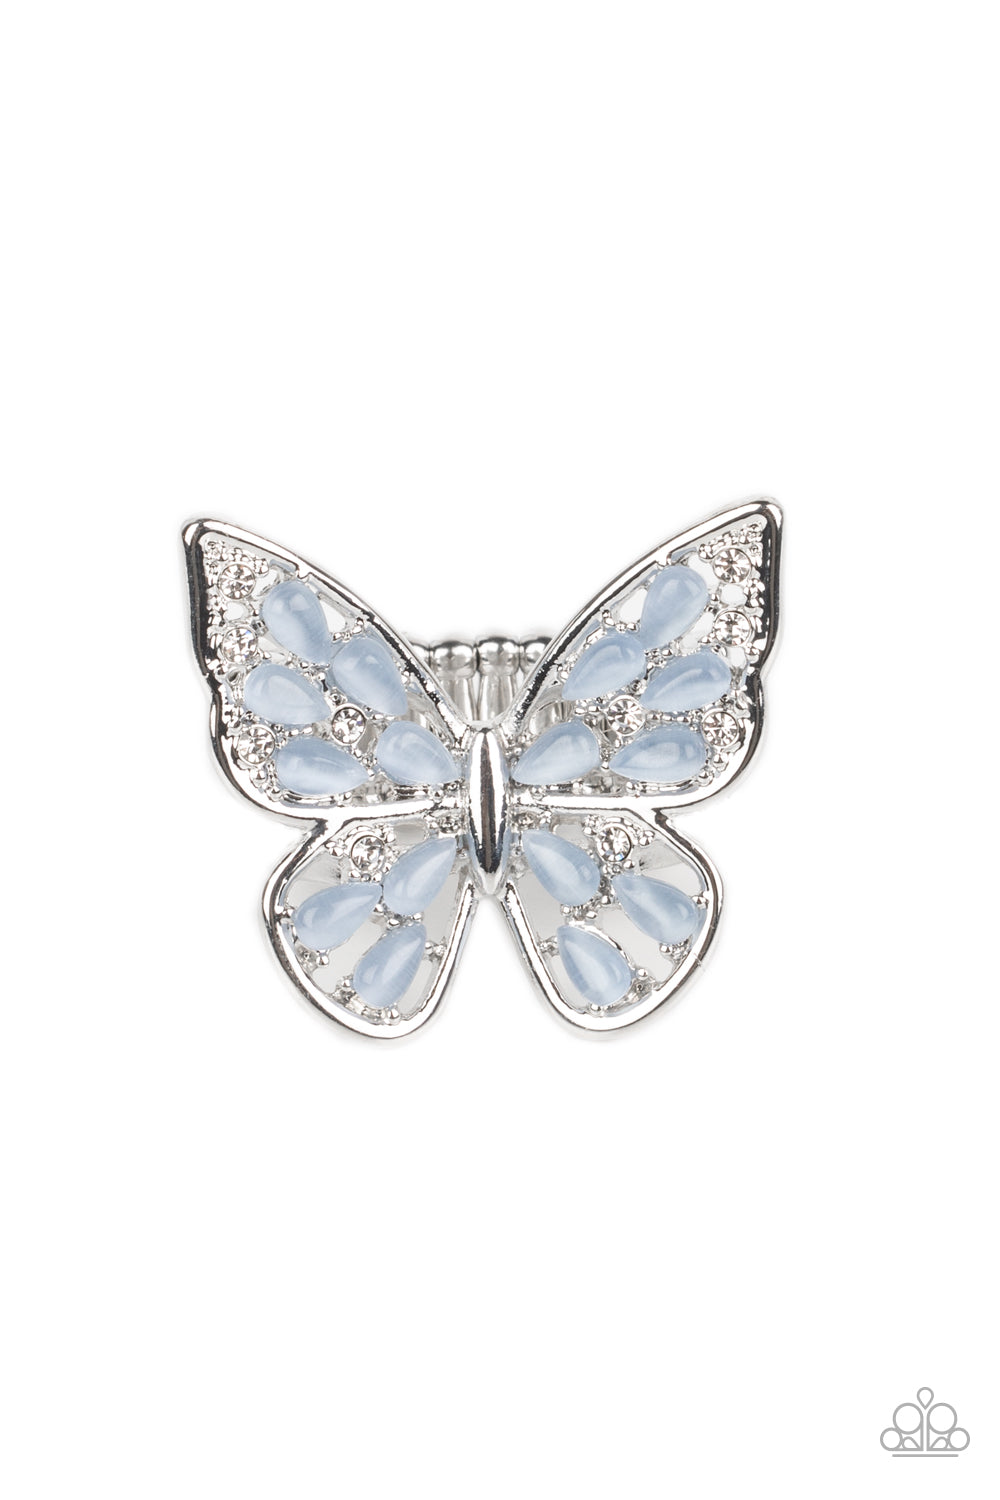 five-dollar-jewelry-flying-fashionista-blue-ring-paparazzi-accessories